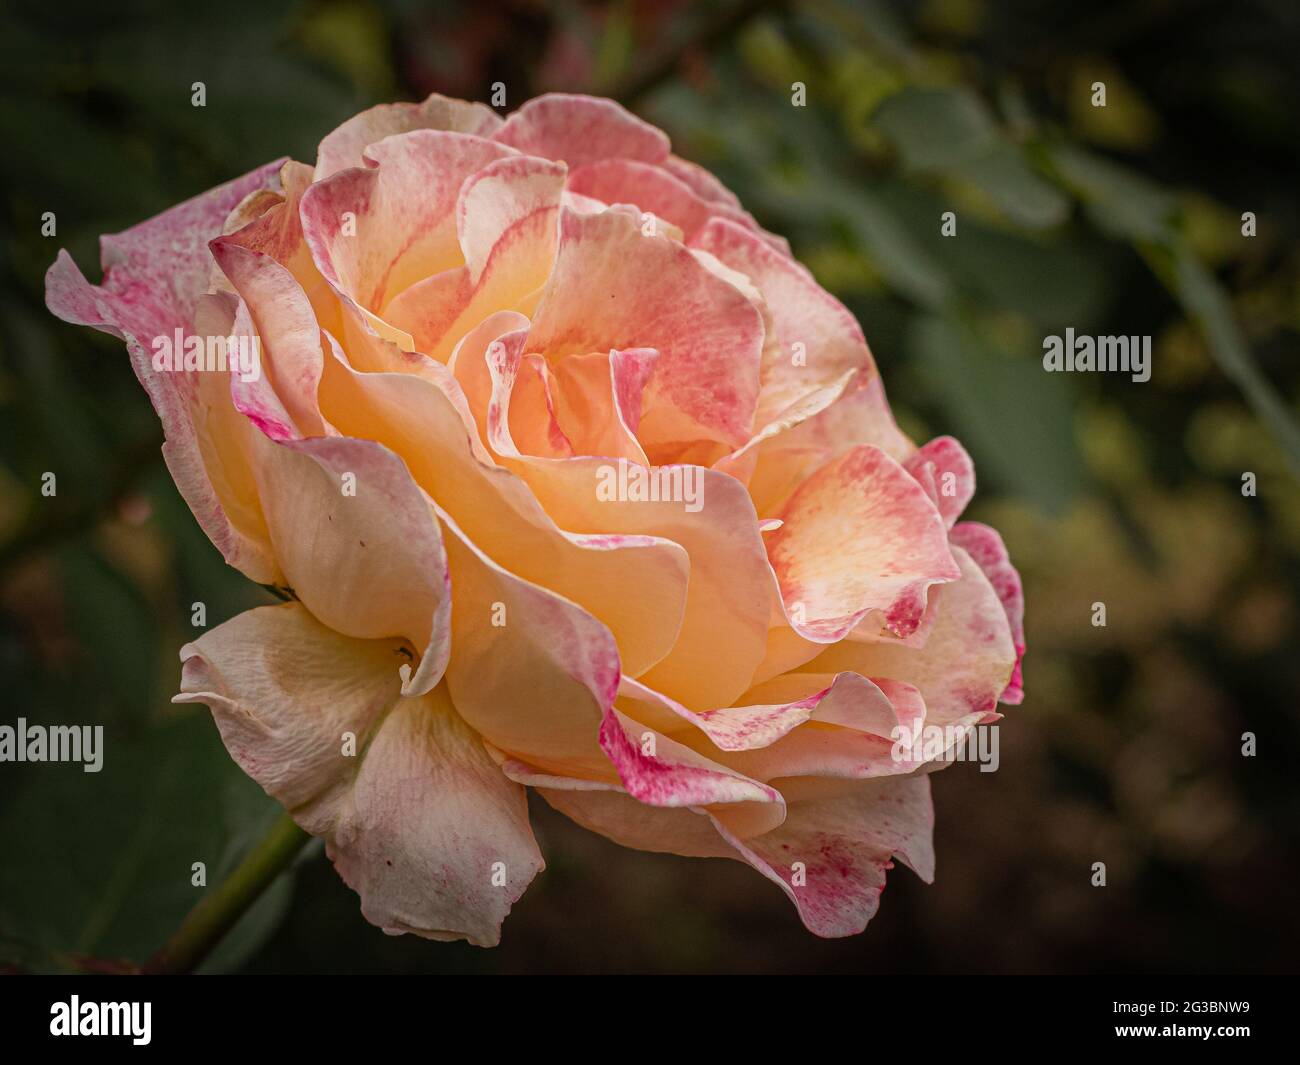 pink and yellow rose flower on blurred background Stock Photo